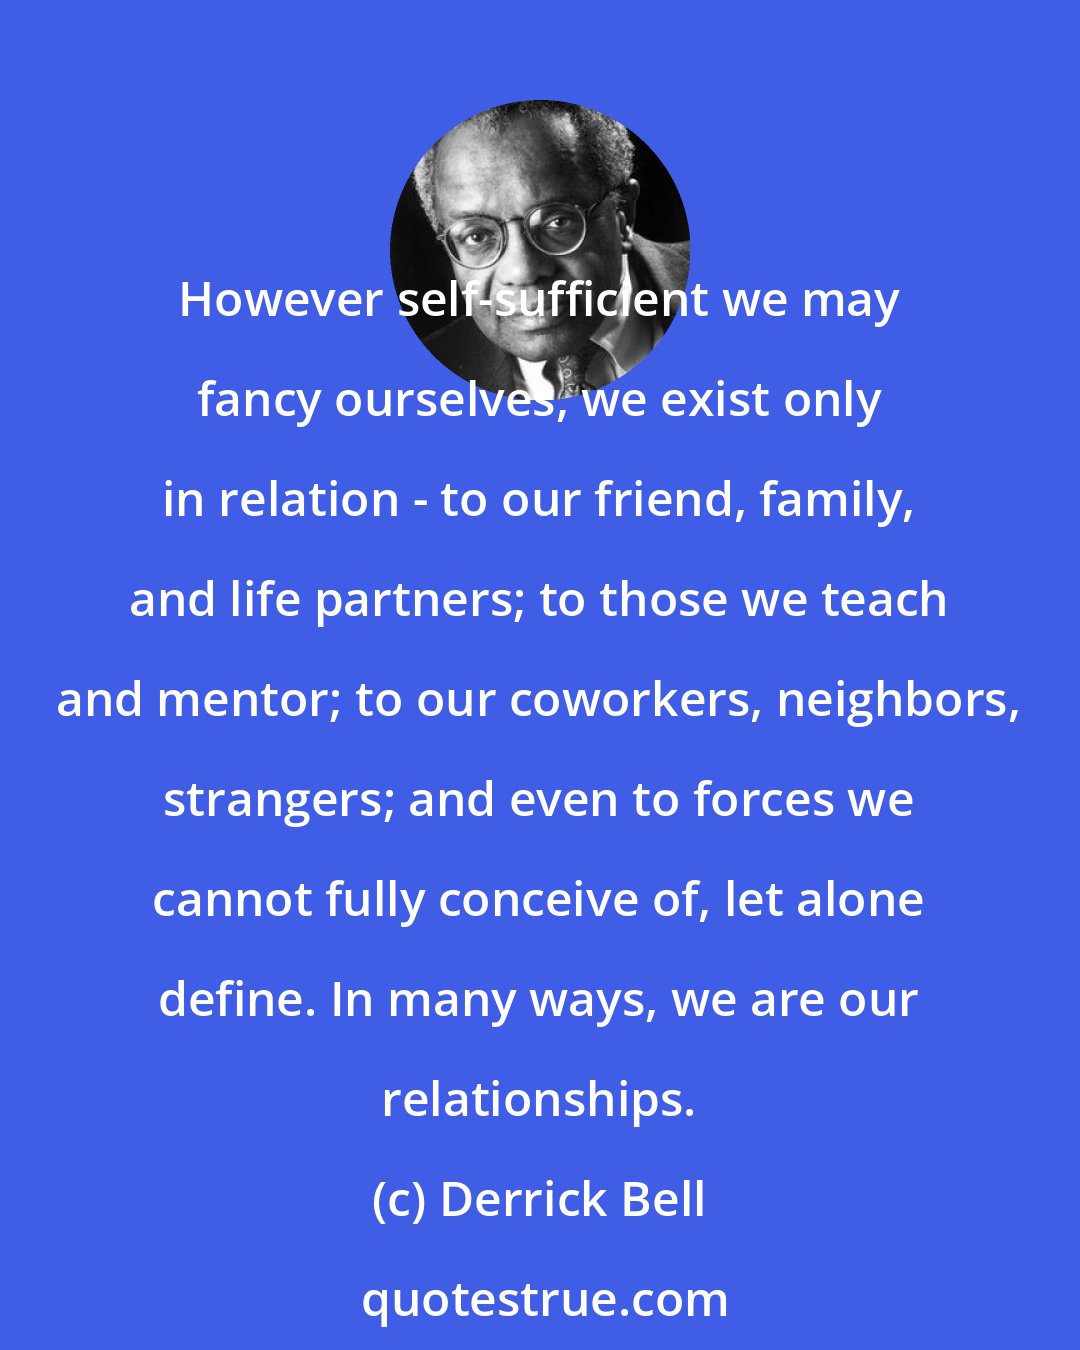 Derrick Bell: However self-sufficient we may fancy ourselves, we exist only in relation - to our friend, family, and life partners; to those we teach and mentor; to our coworkers, neighbors, strangers; and even to forces we cannot fully conceive of, let alone define. In many ways, we are our relationships.